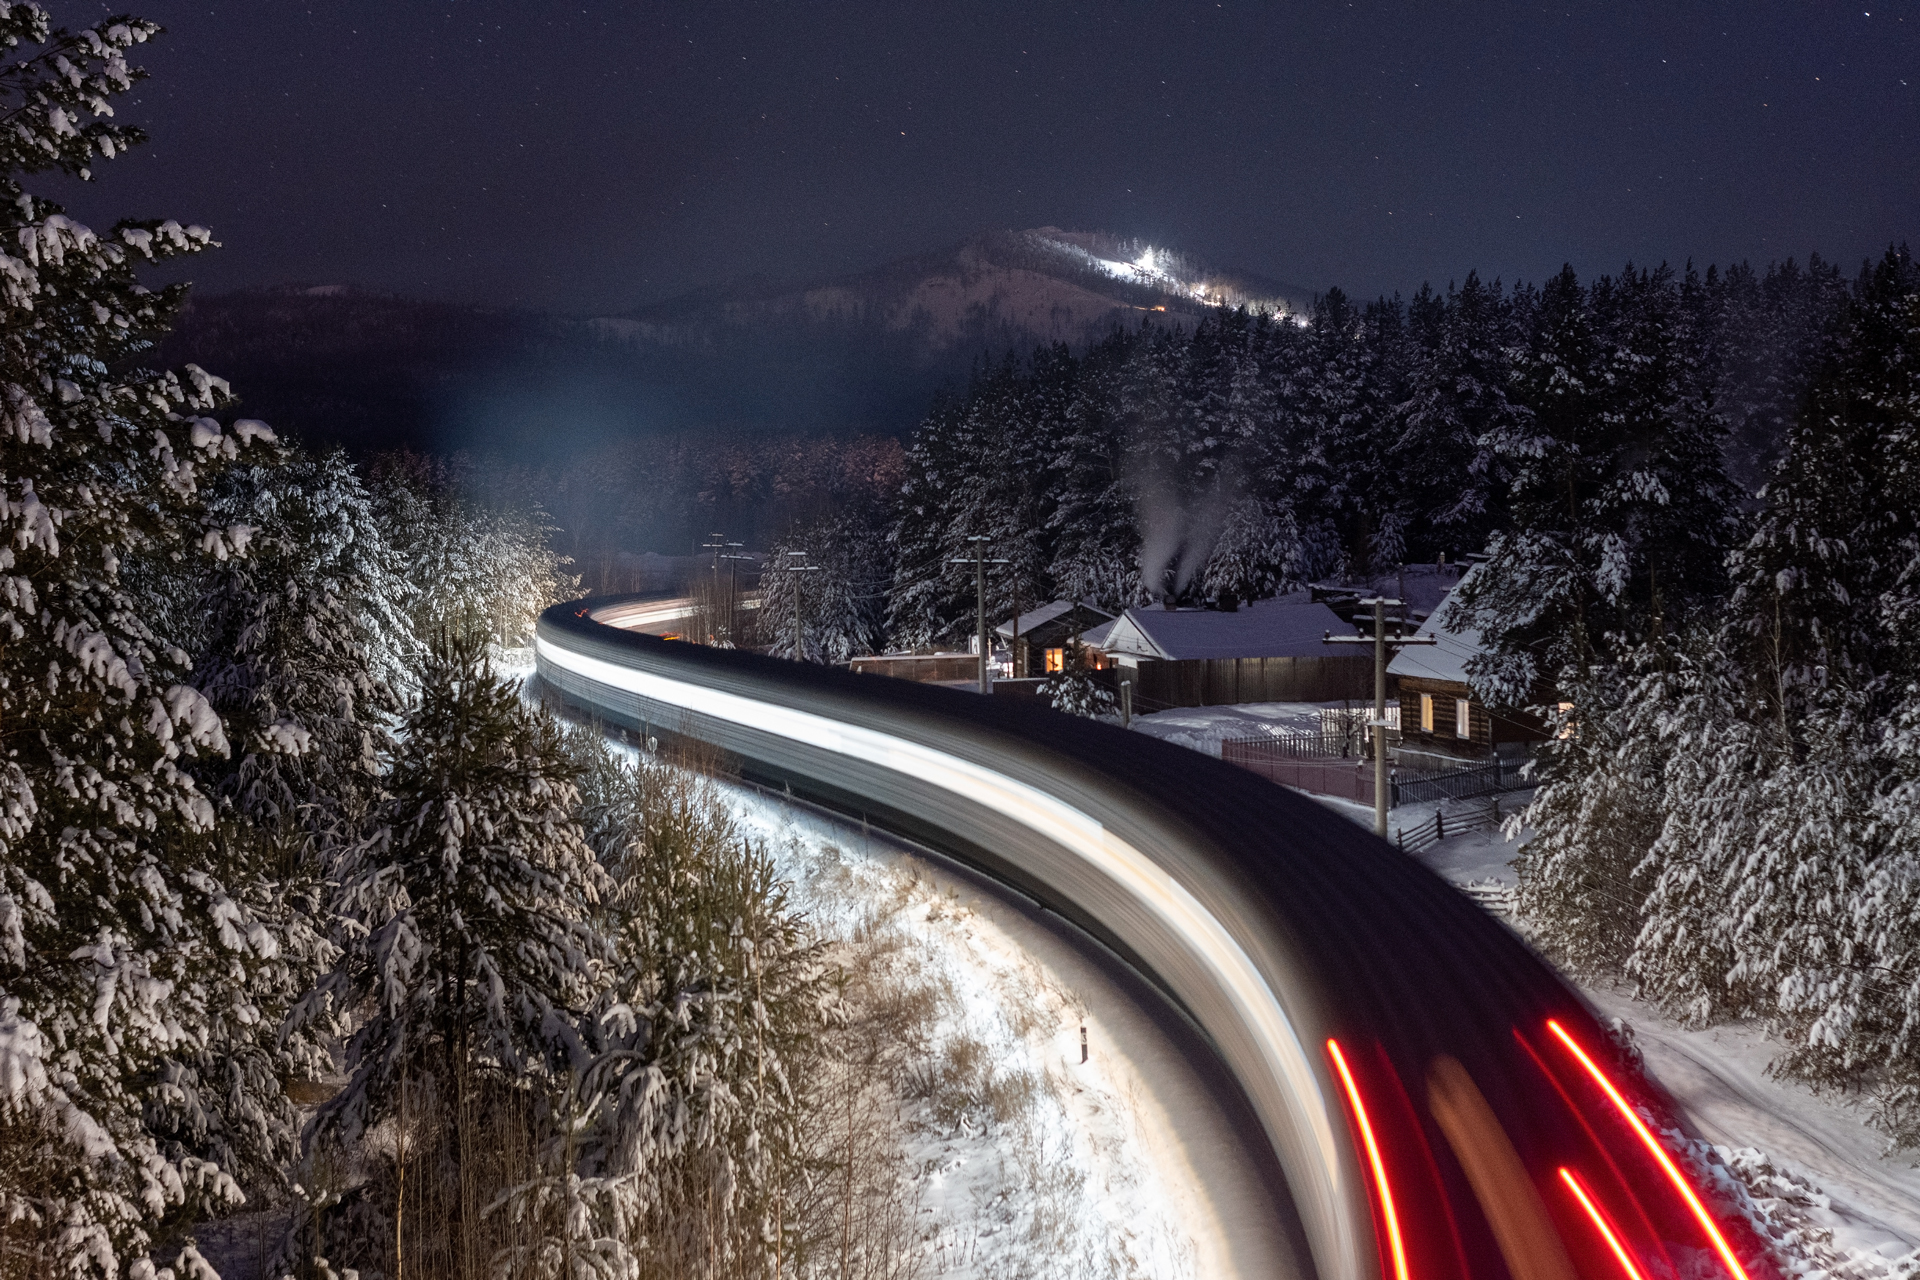 General 1920x1280 nature landscape winter snow road long exposure motion blur night forest trees house cabin stars mountains hills train low light